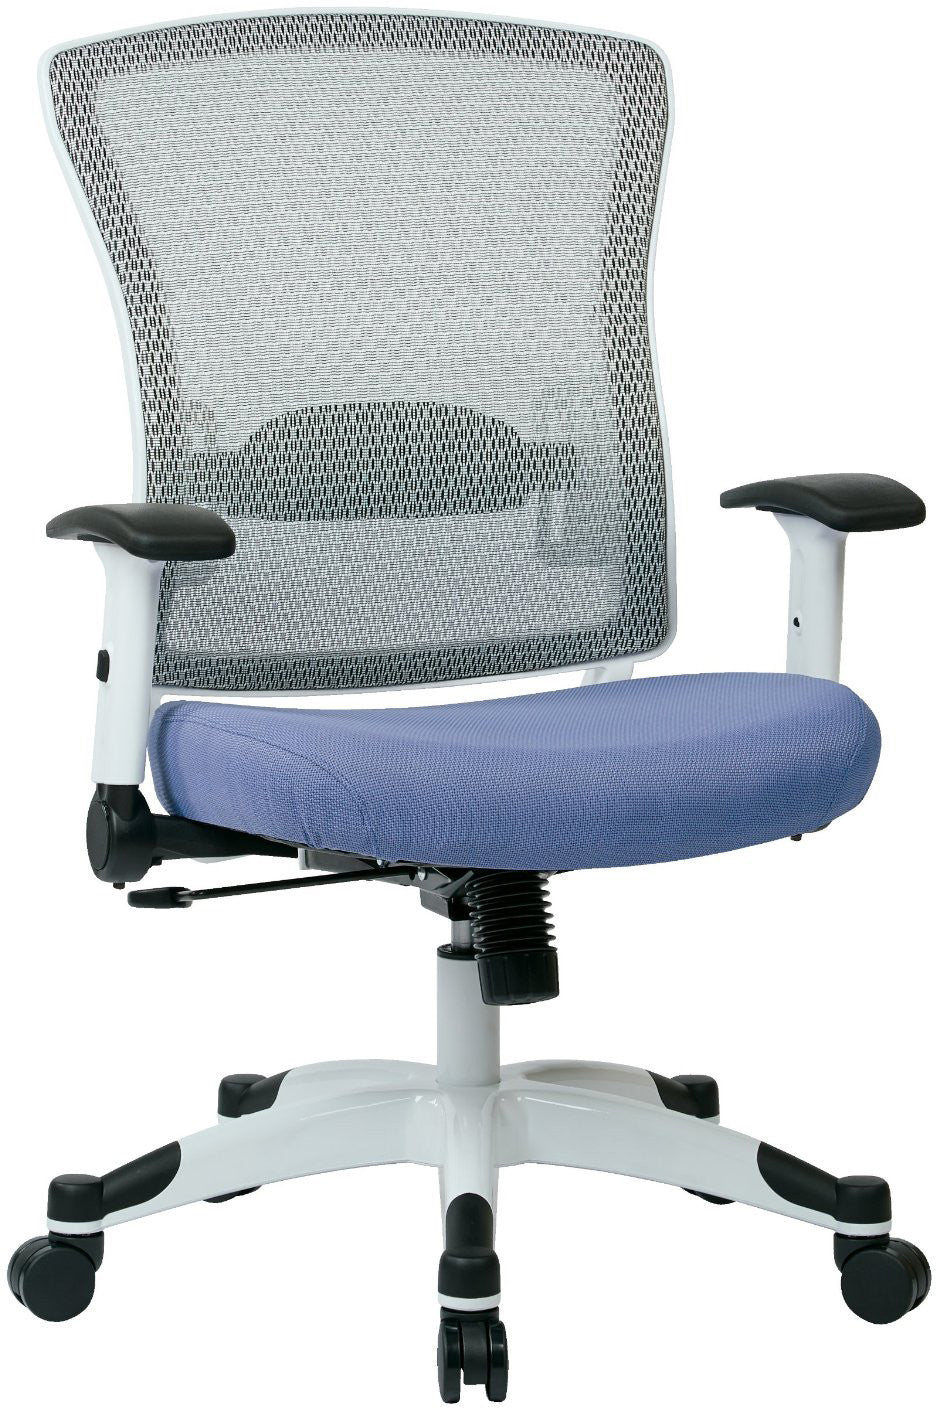 Space Seating 317w-w1c1f2w-5819 Space Seating White Frame Managers Chair With Breathable Mesh Back, Padded Mesh Seat, Adjustable Flip Arms, Adjustable